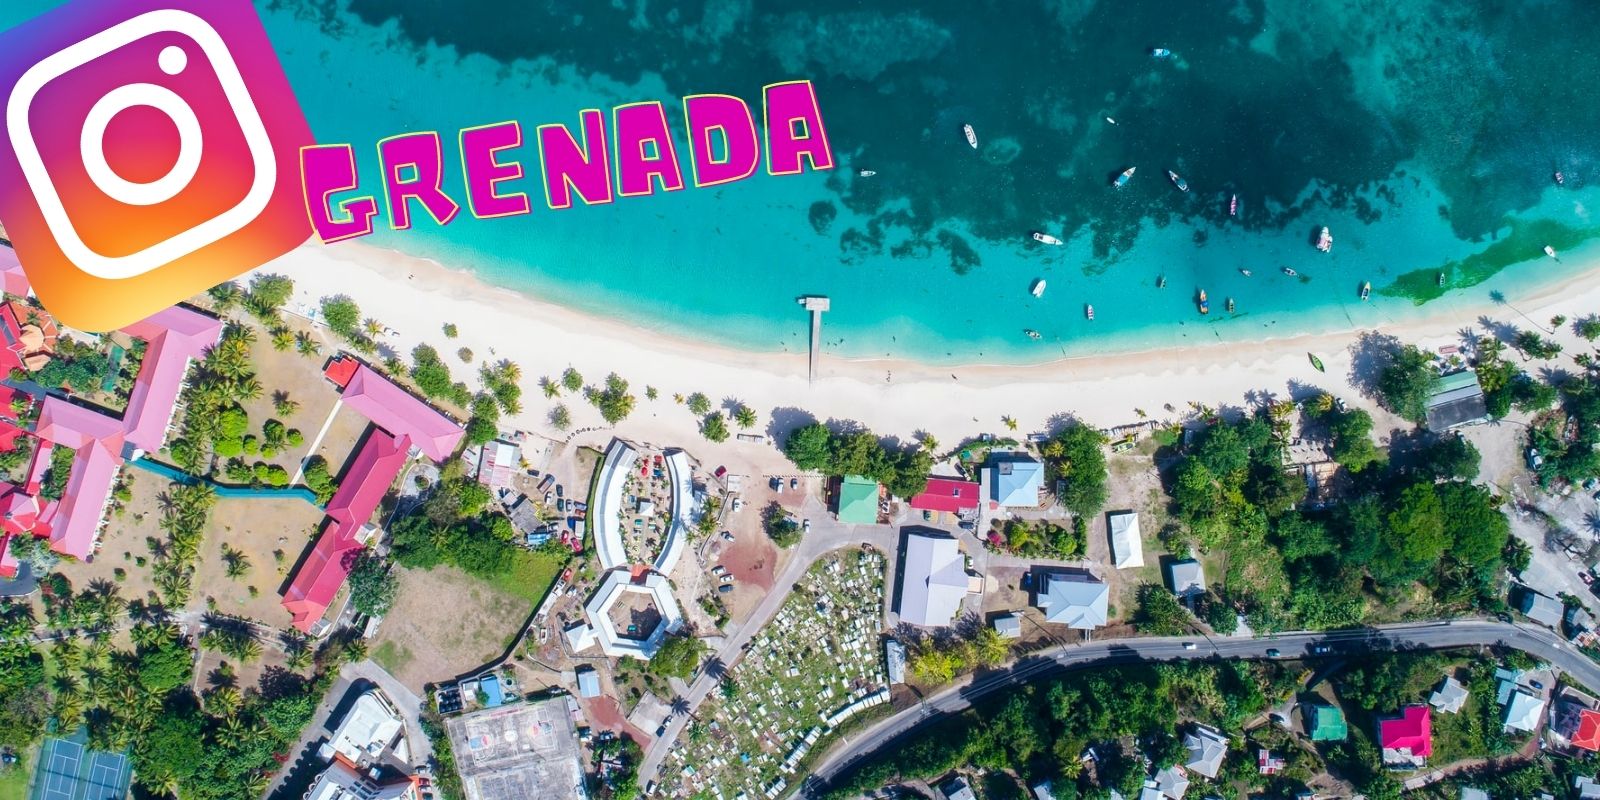 Travel blog: Take an Instagram tour of the best things to do in Grenada